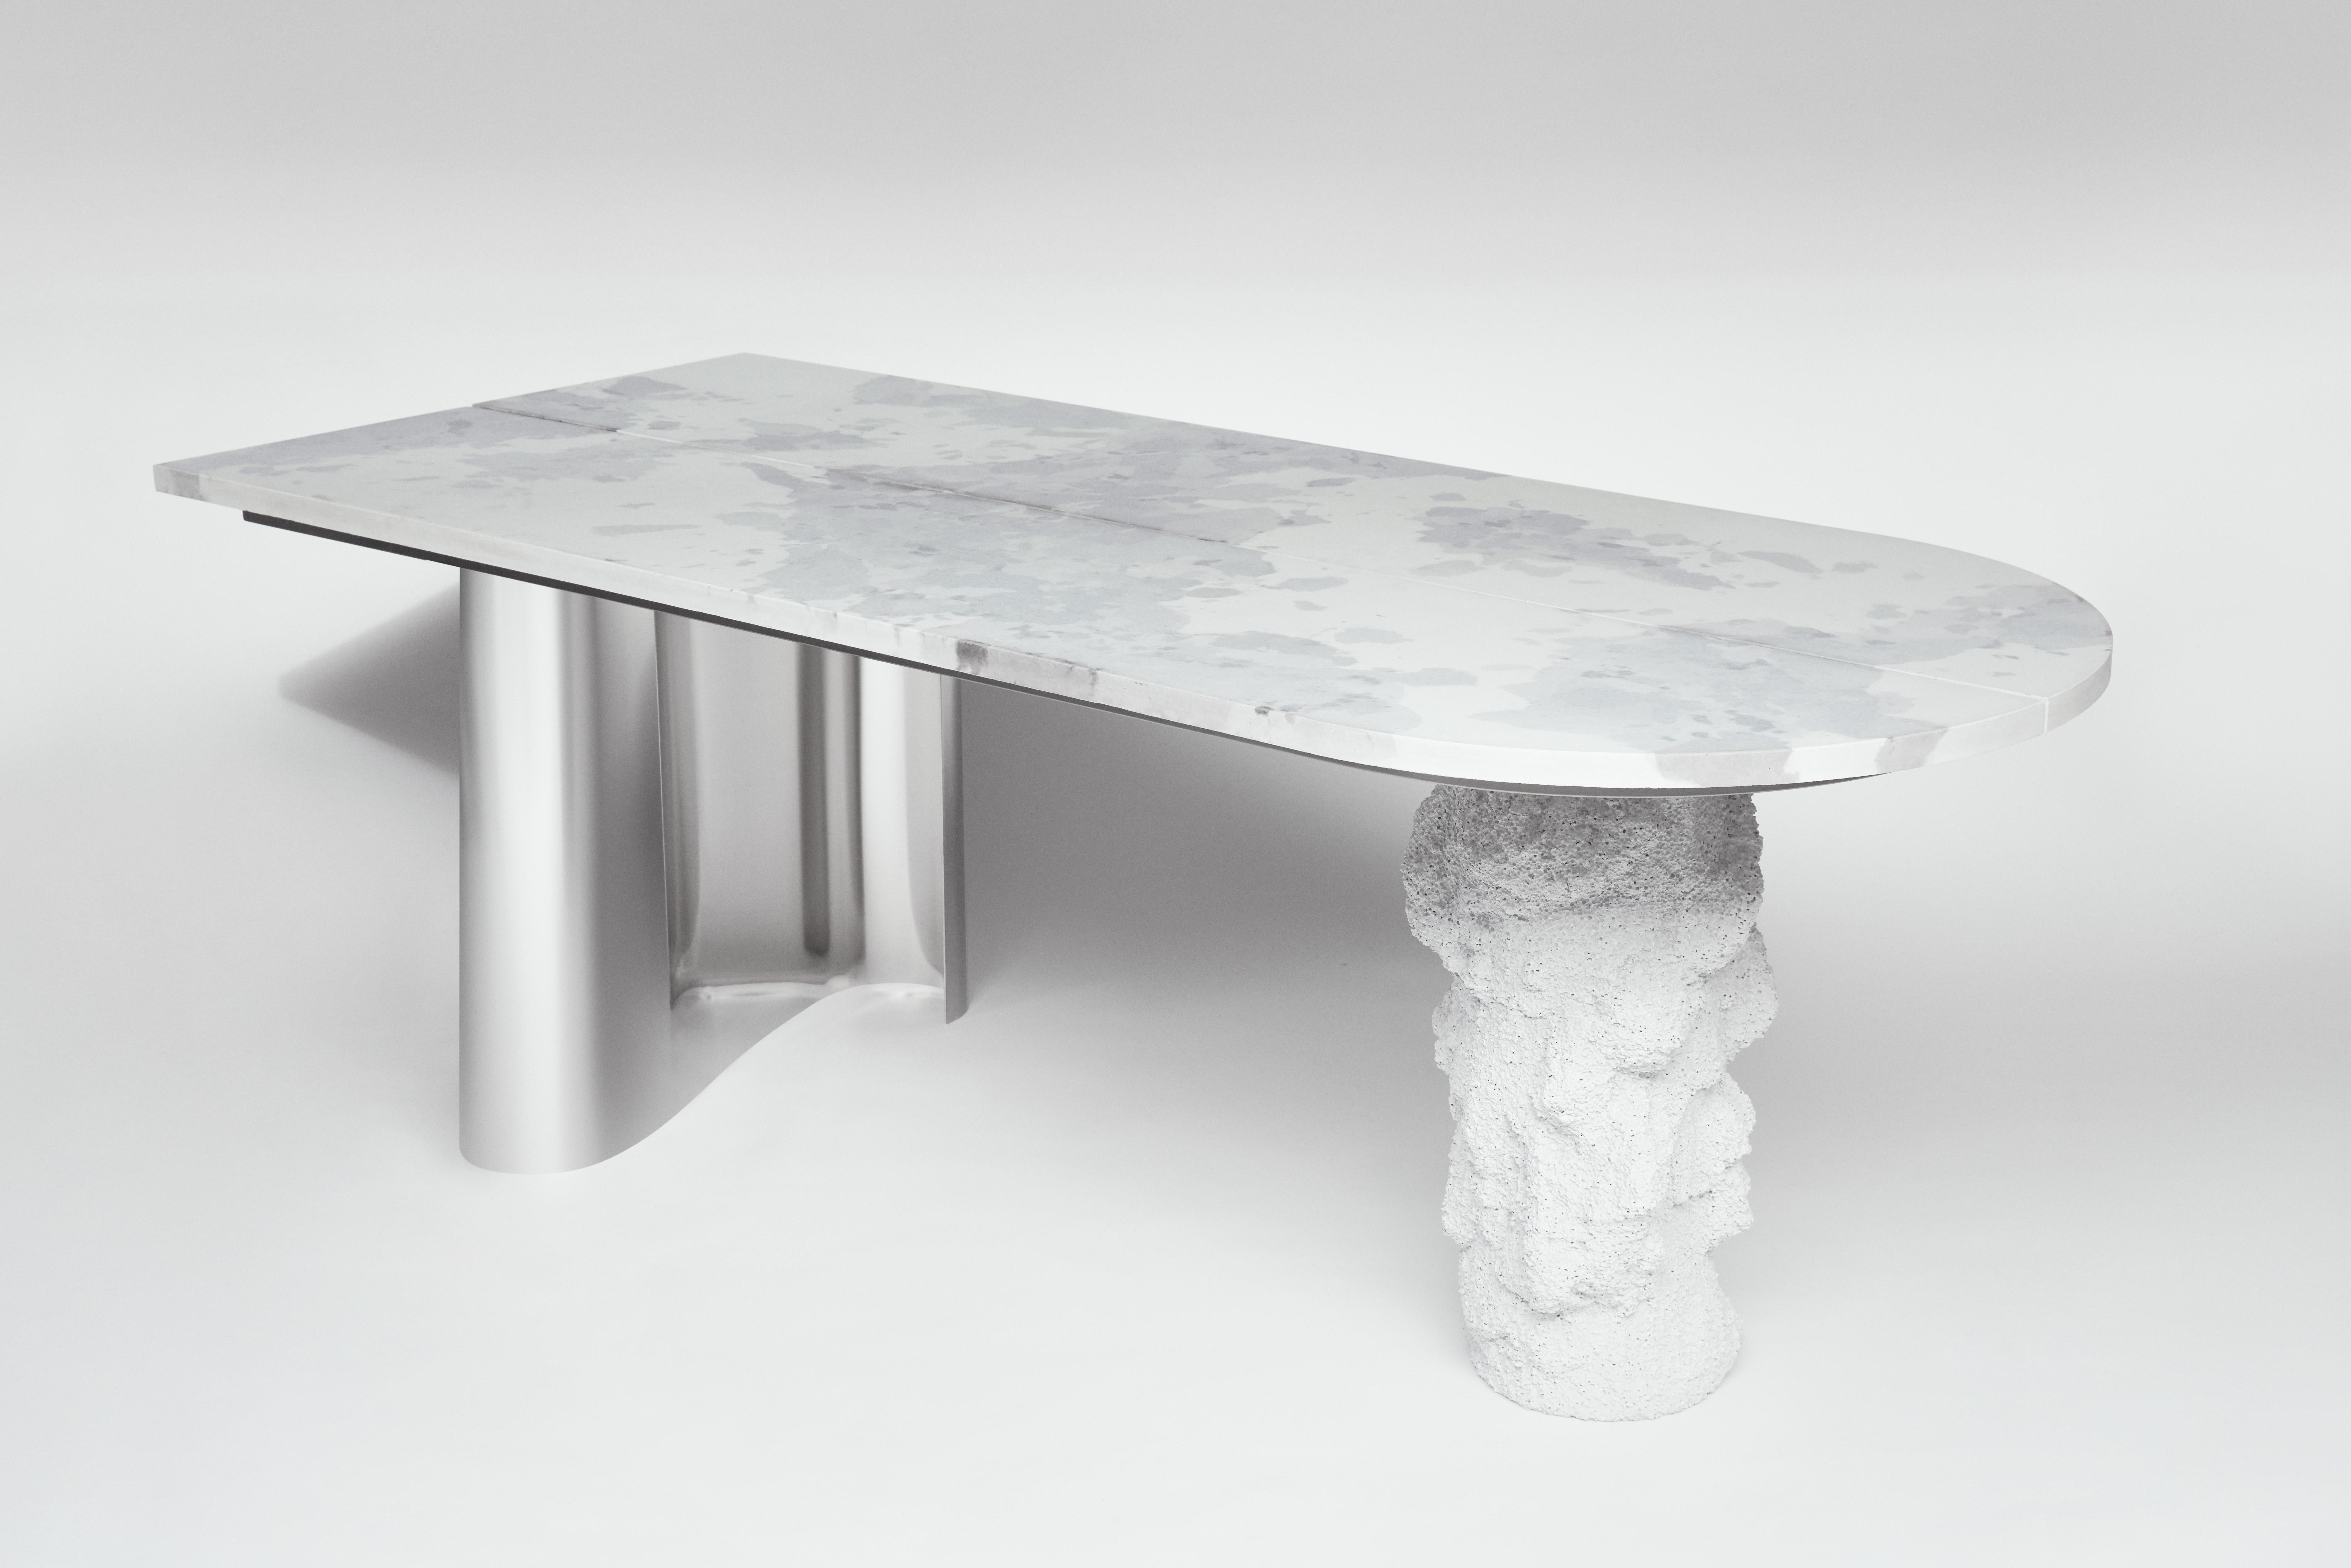 Your Private Sky, like the other pieces designed by the duo – he’s an artist, she’s a designer – was made entirely by hand. It is characterized by a concrete support surface, finished with a white texture that, according to the designers’ intention,